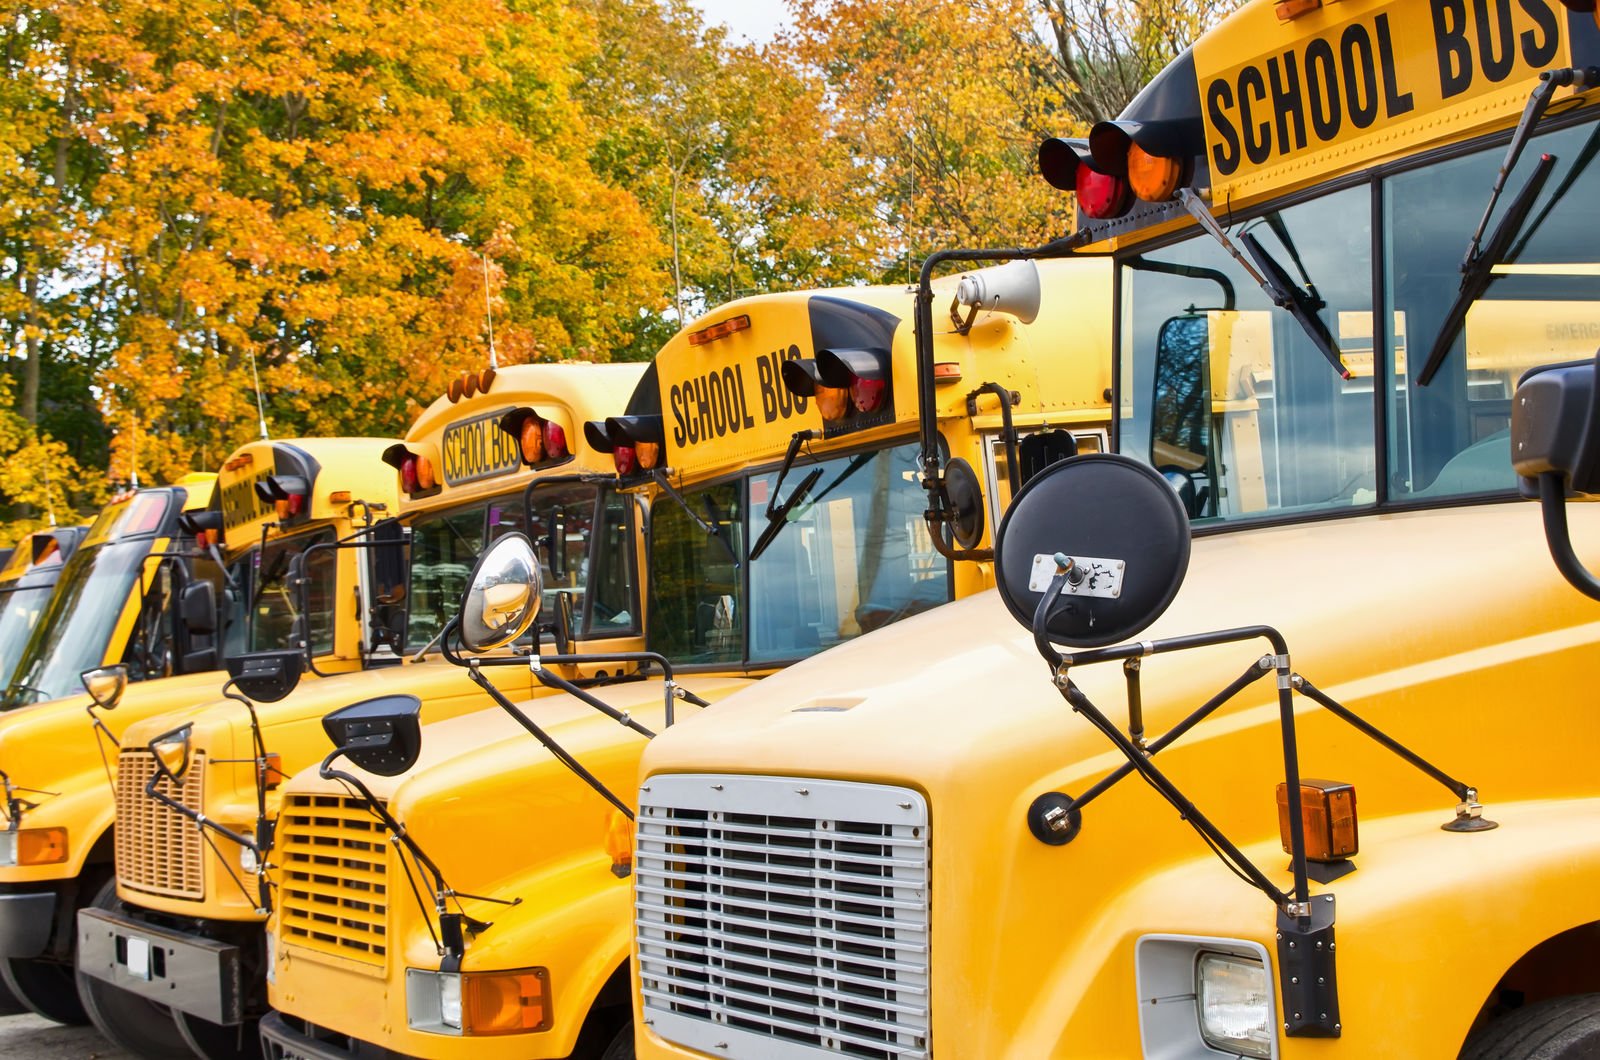 School Bus Requirements for Auto Insurance